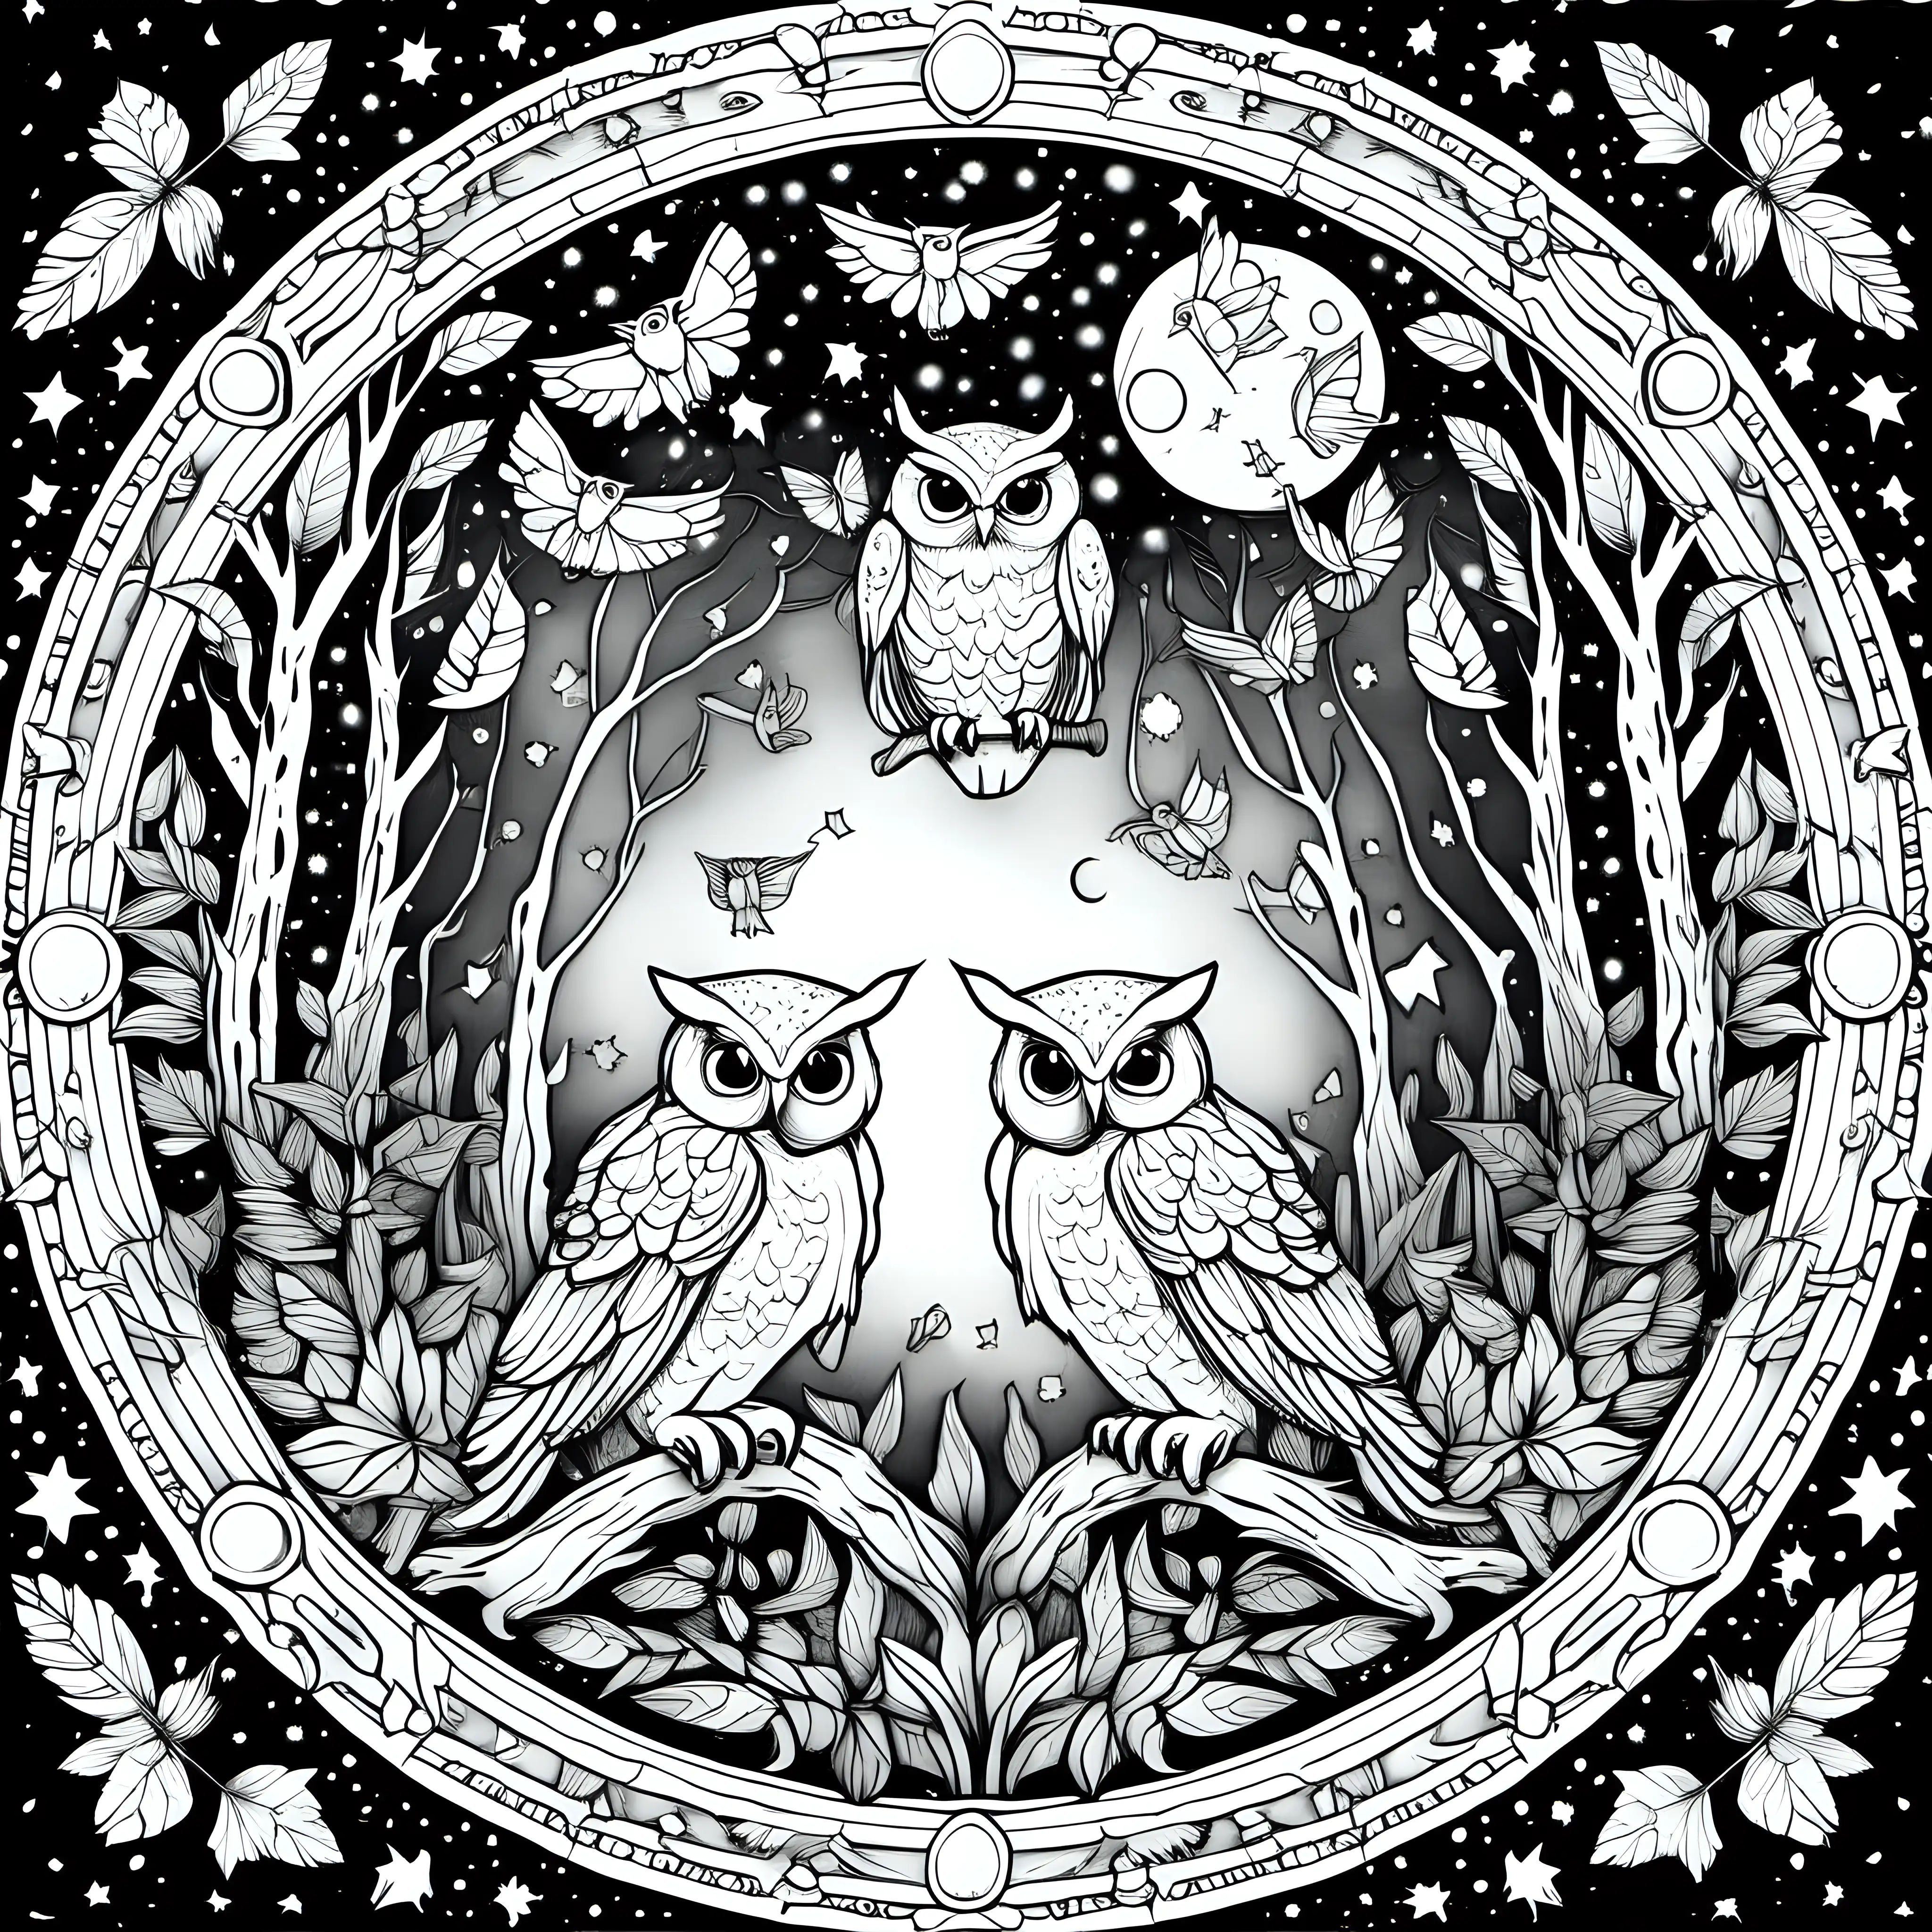 Moonlit Forest Mandala: A mandala capturing the enchantment of a moonlit forest with owls and fireflies for coloring book with crisp lines and white background